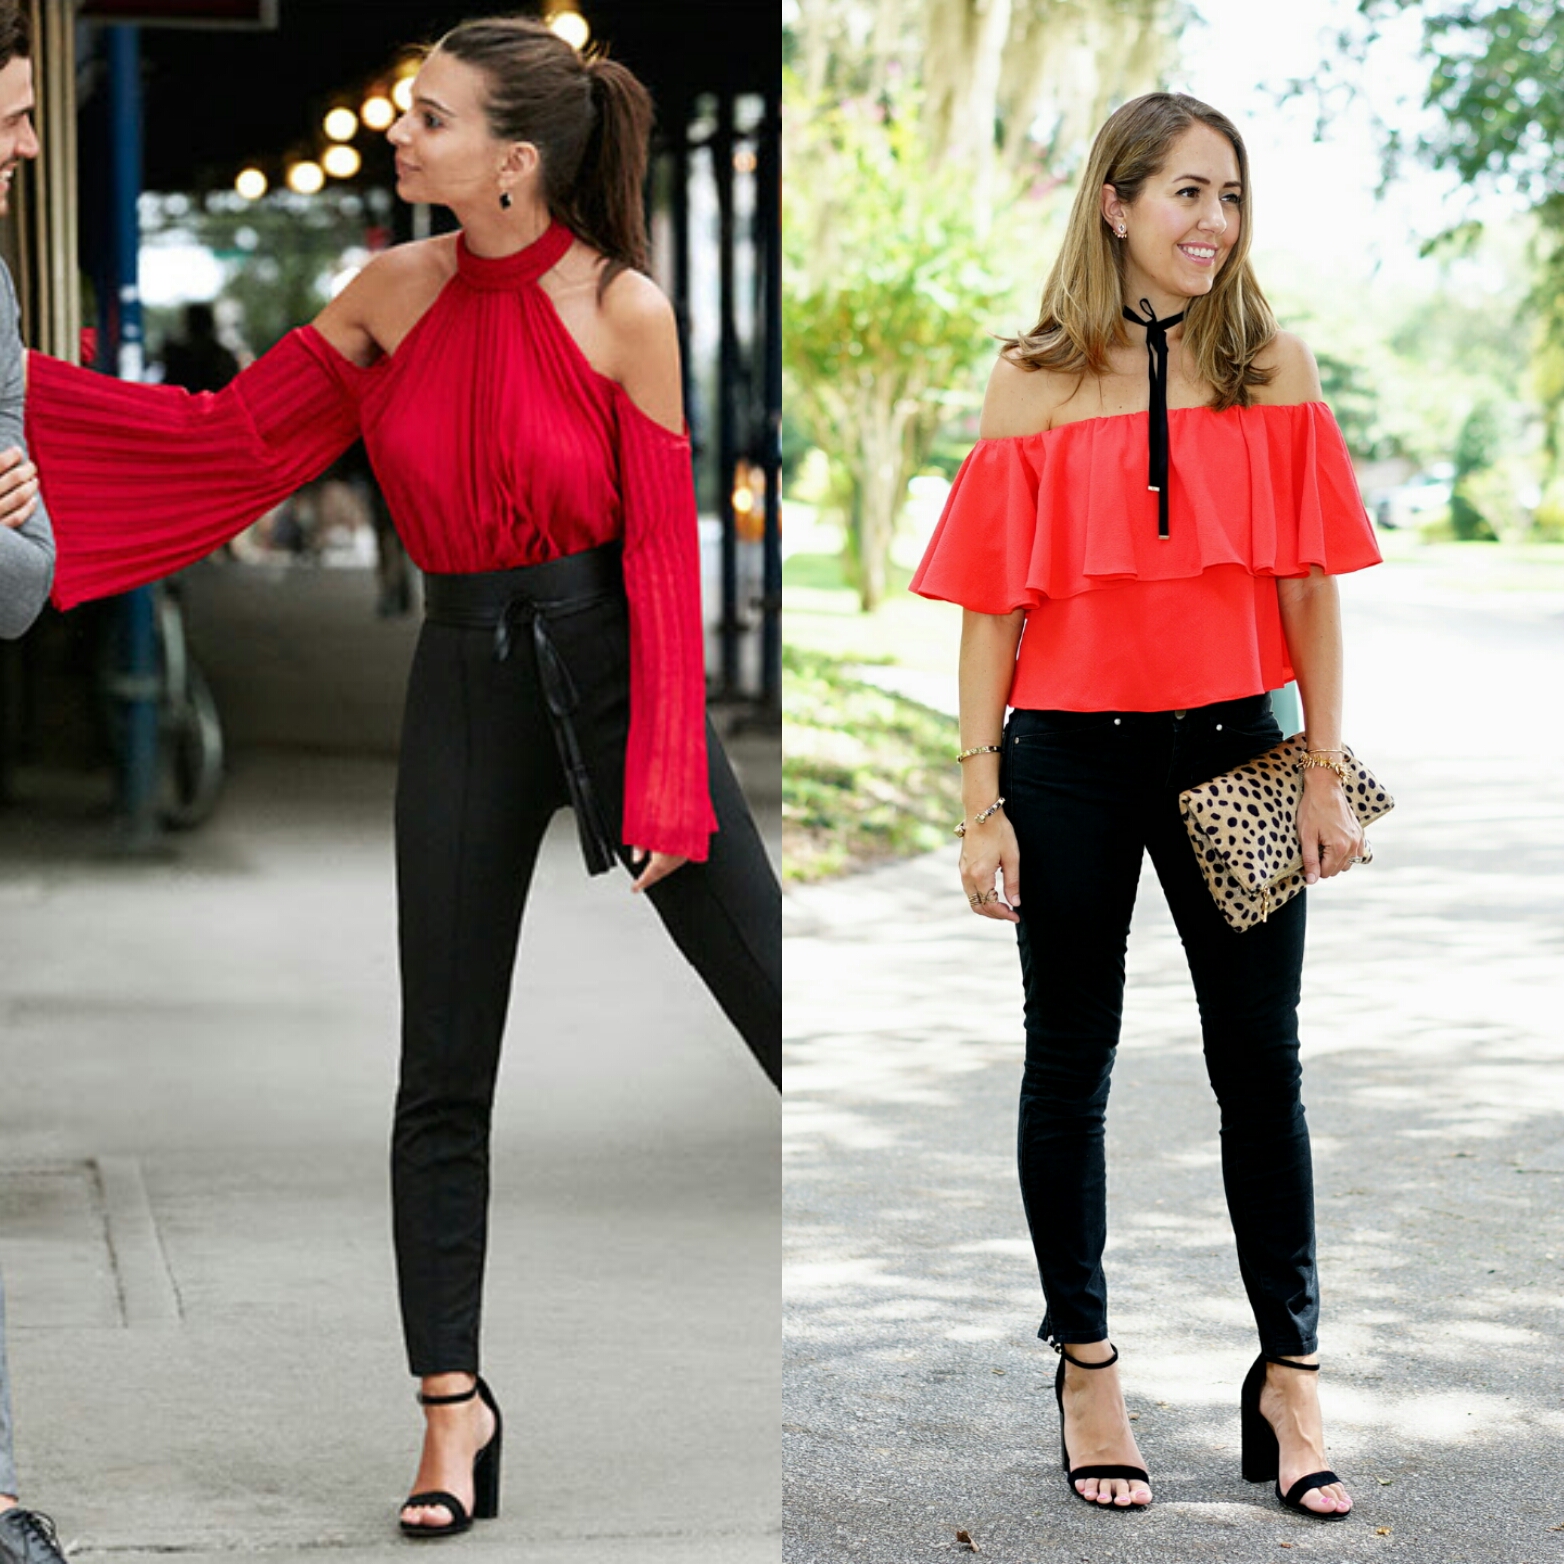 red and black outfit for ladies